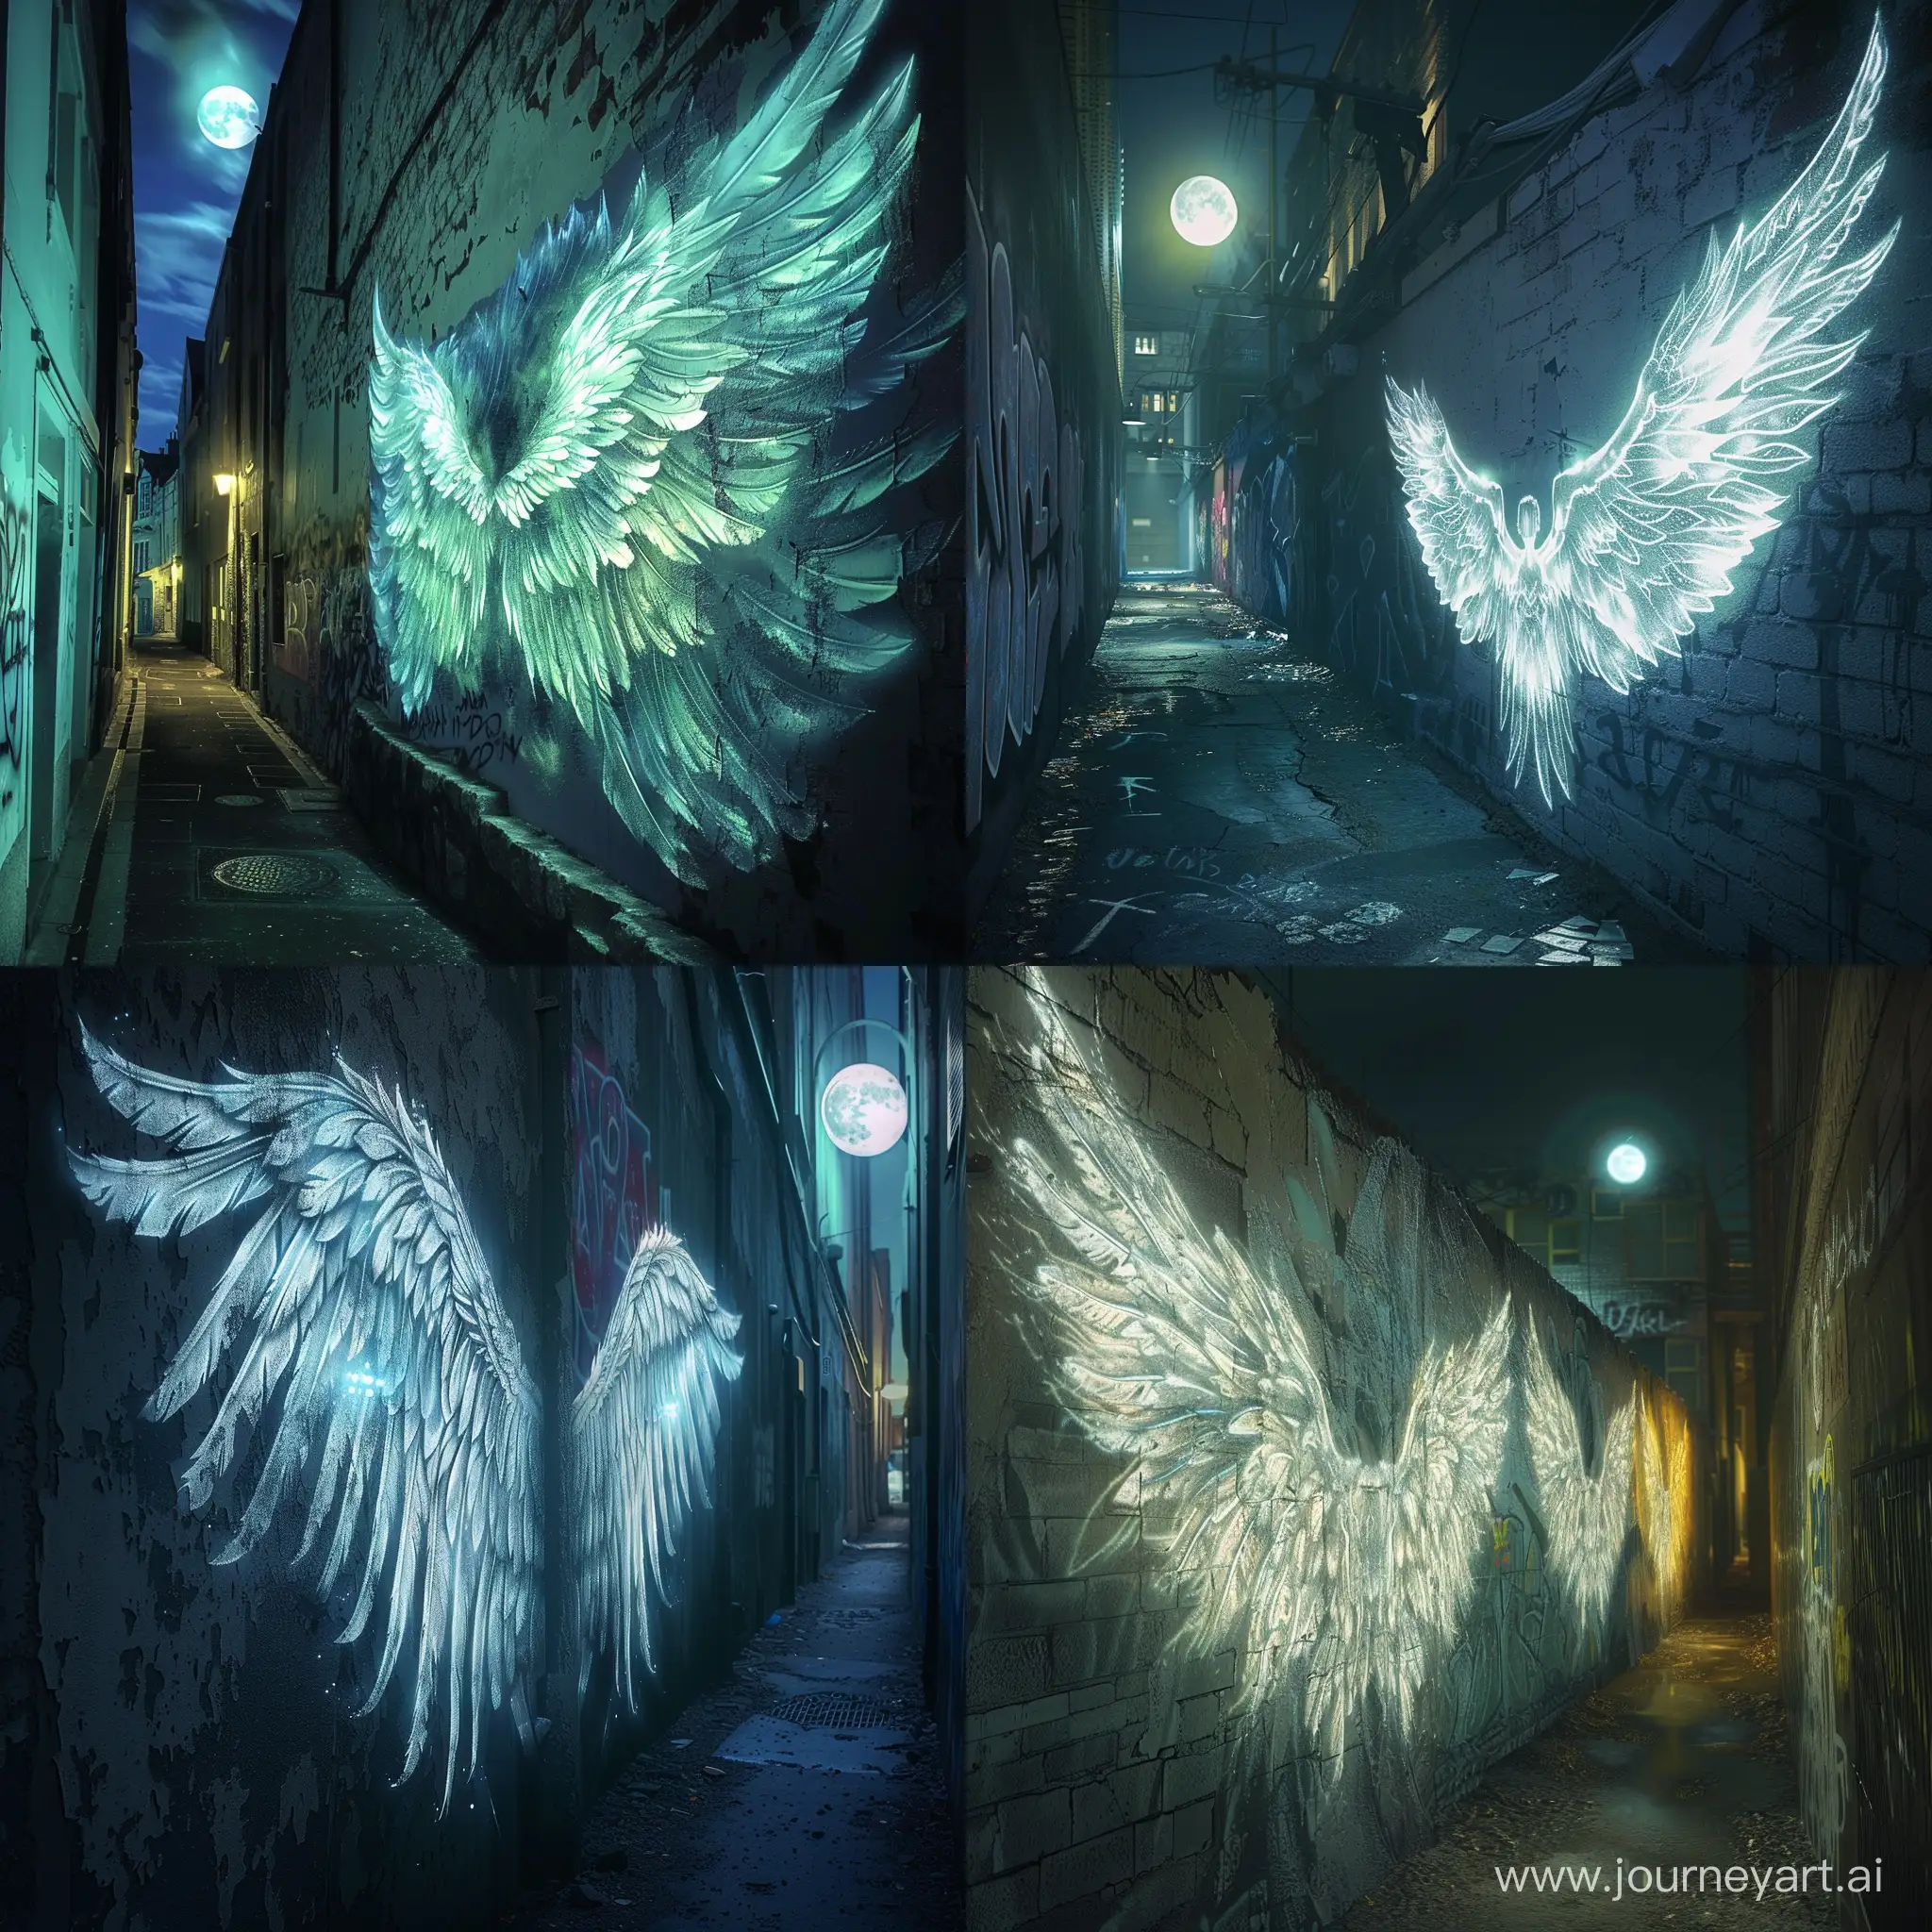 Moonlit-Alley-with-Glowing-Angelic-Wings-Mural